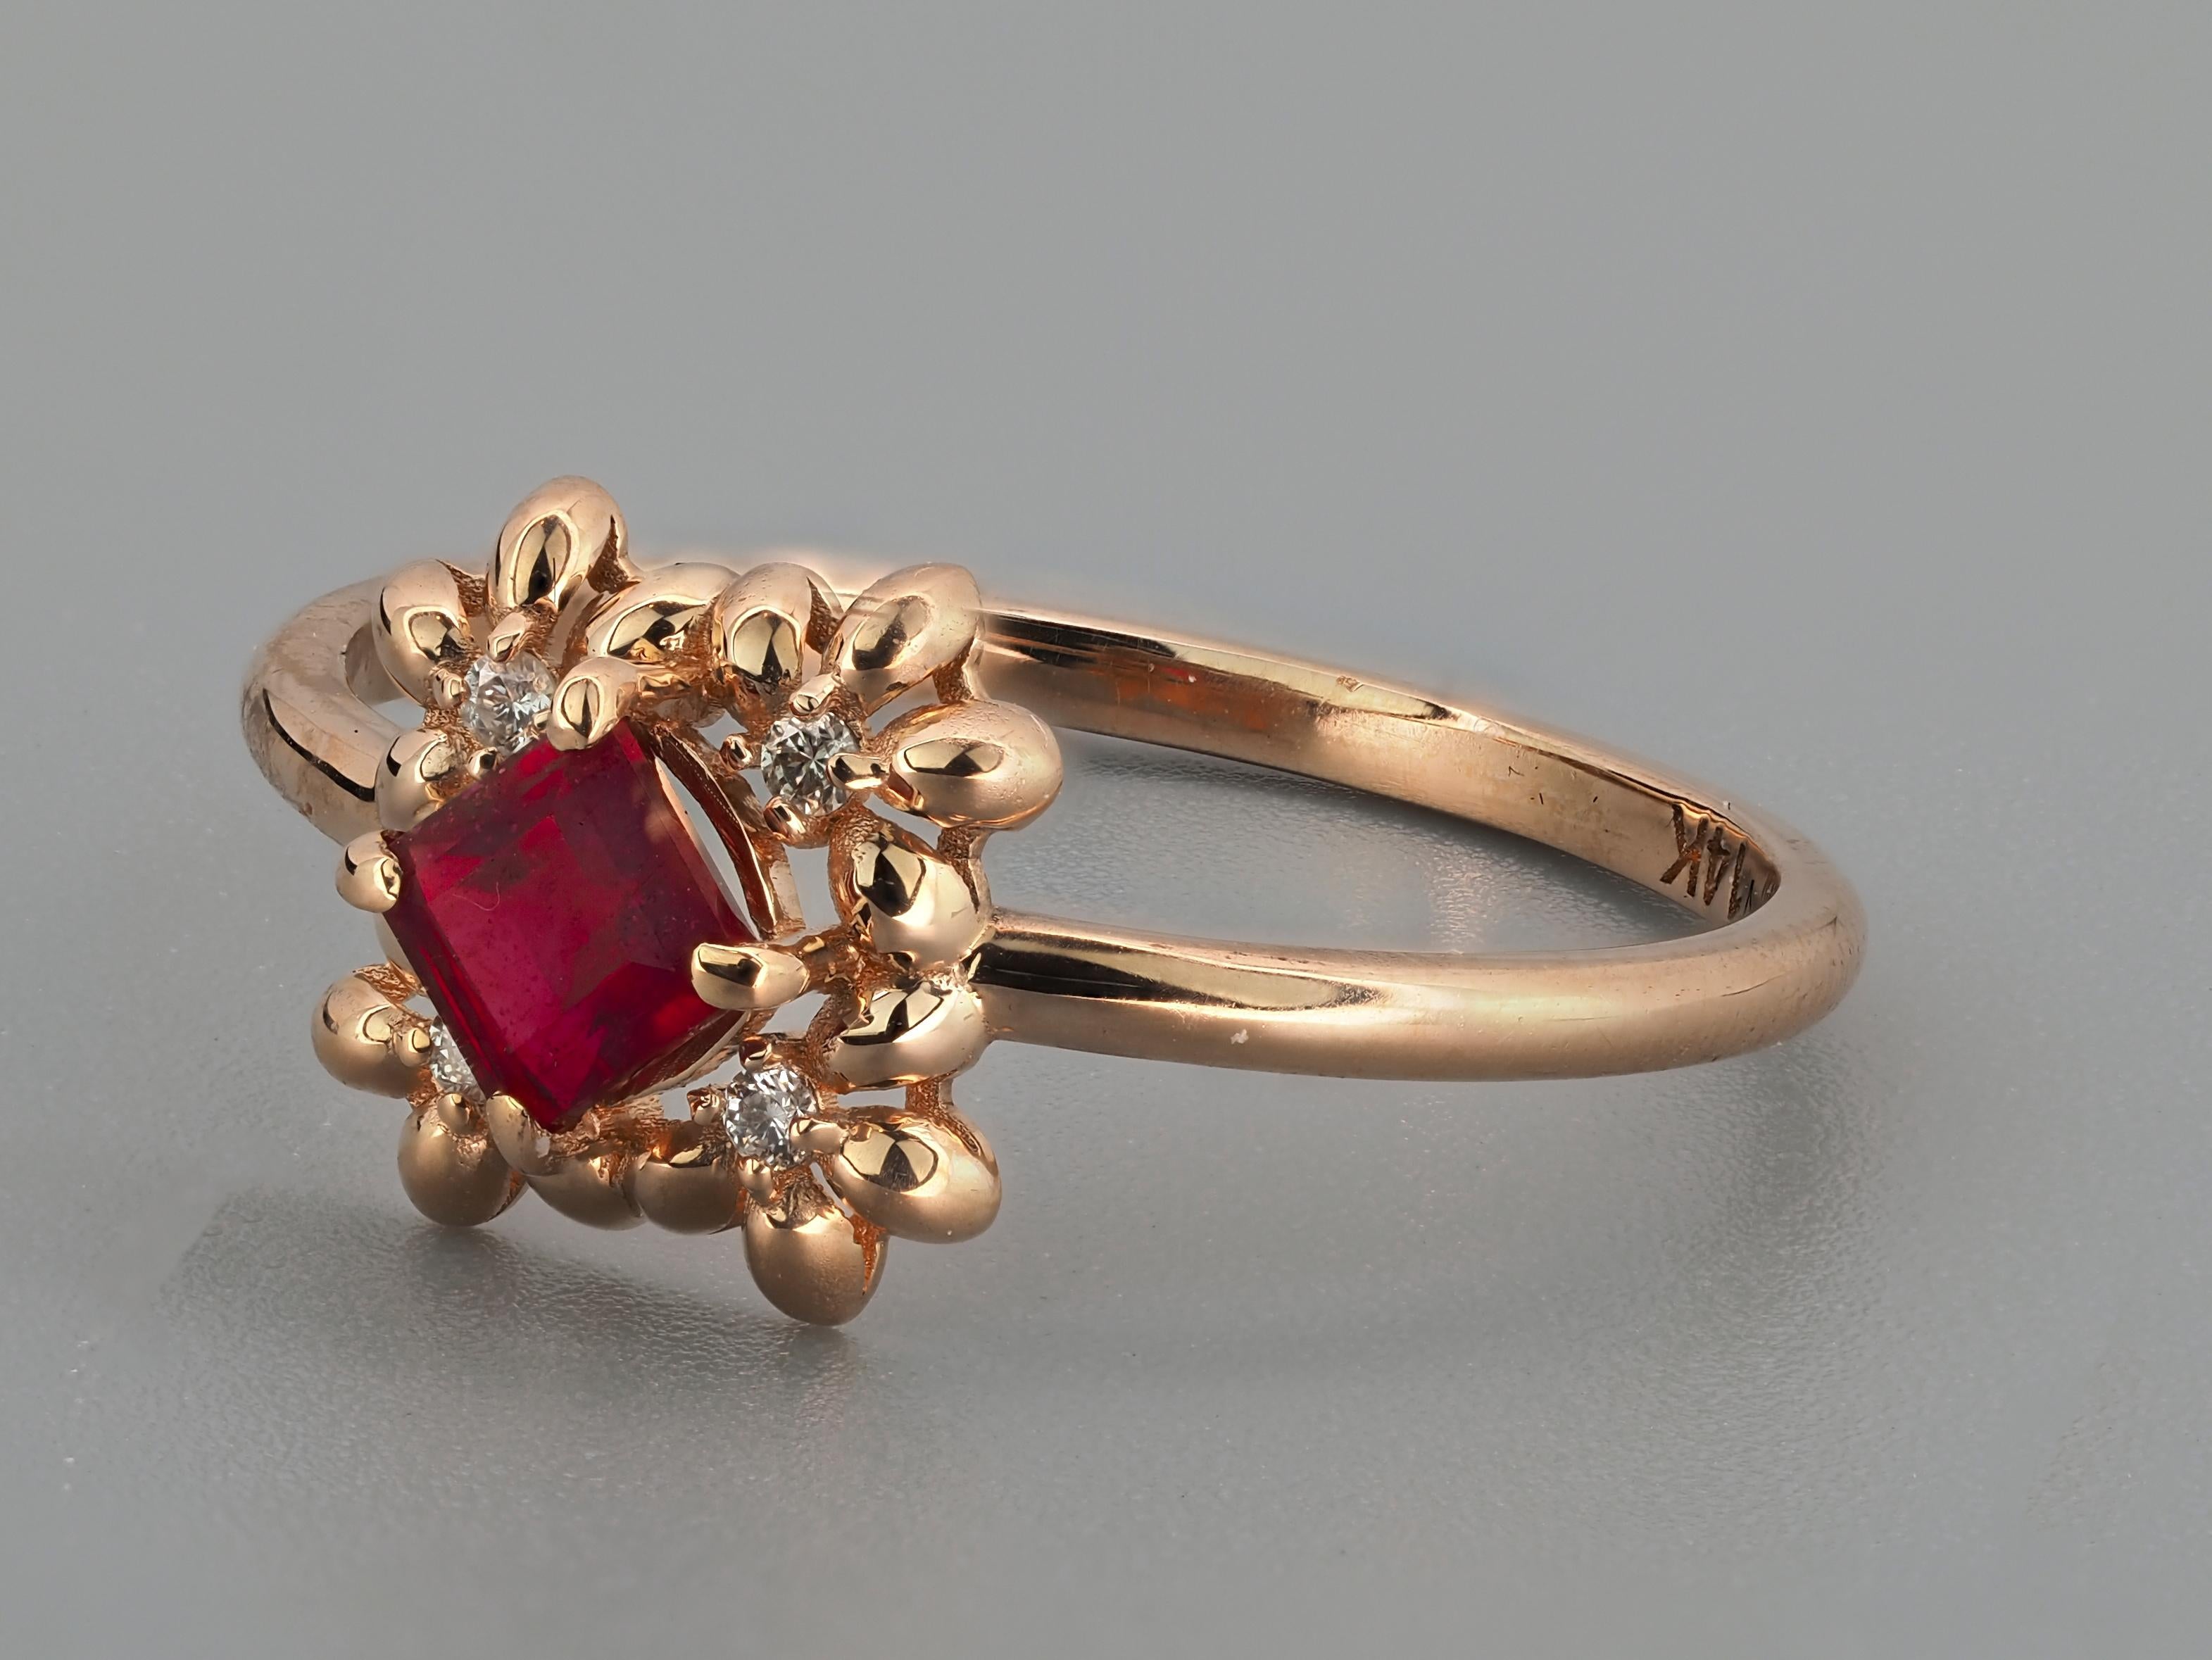 Princess Cut Princess Ruby Ring in 14k Gold.  For Sale